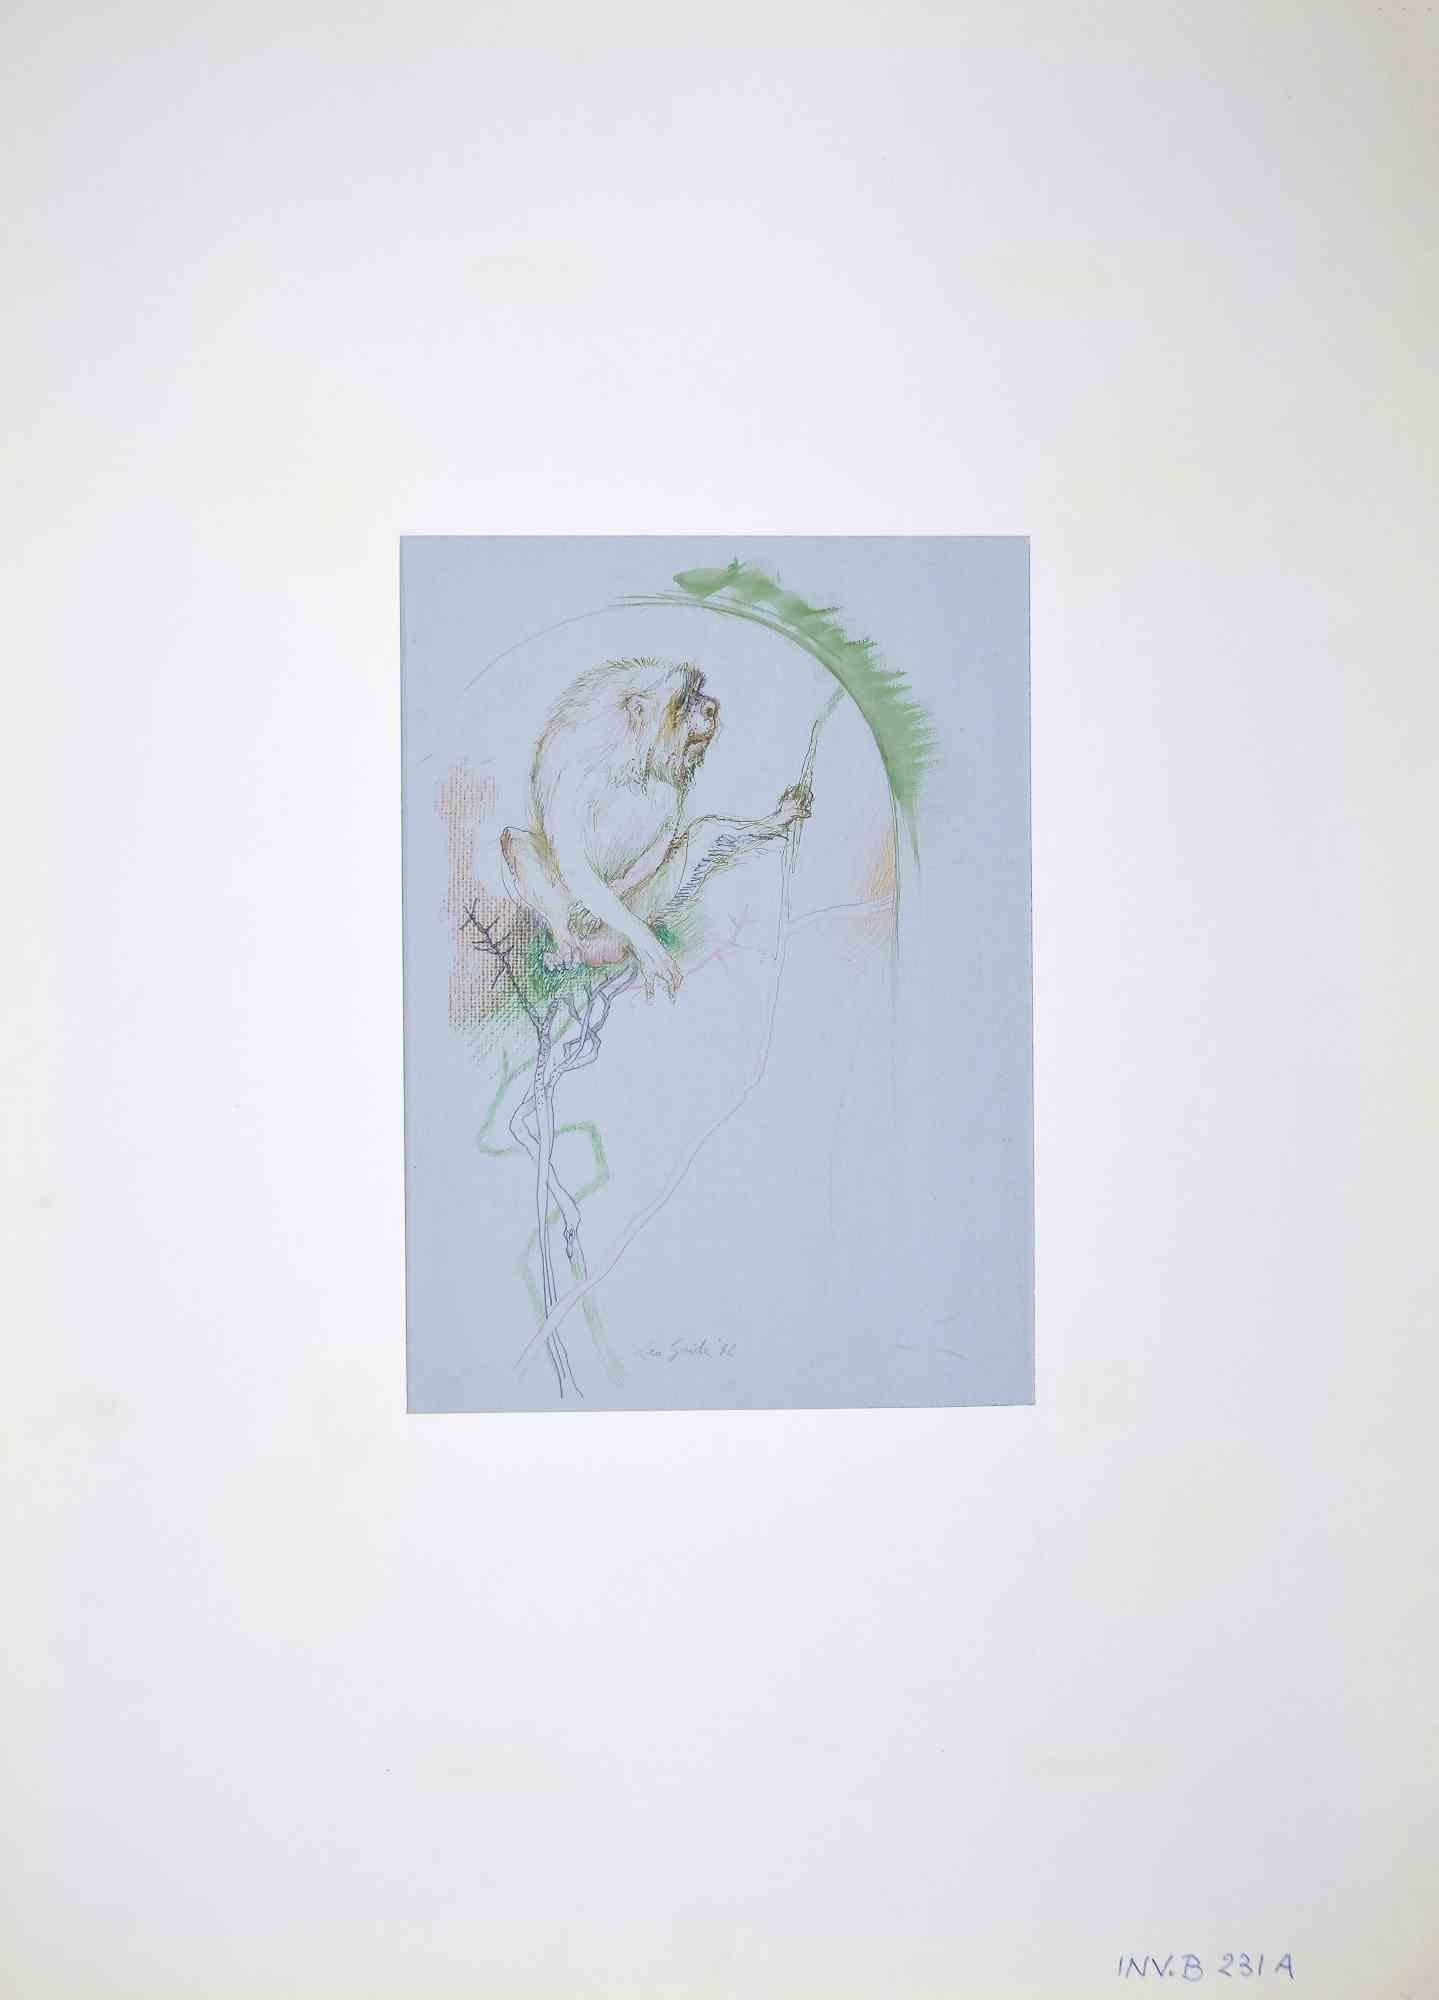 Monkey is an original drawing in pastels and ink realized by Leo Guida in 1970.

Good condition.

Leo Guida  (1992 - 2017). Sensitive to current issues, artistic movements and historical techniques, Leo Guida has been able to weave with many